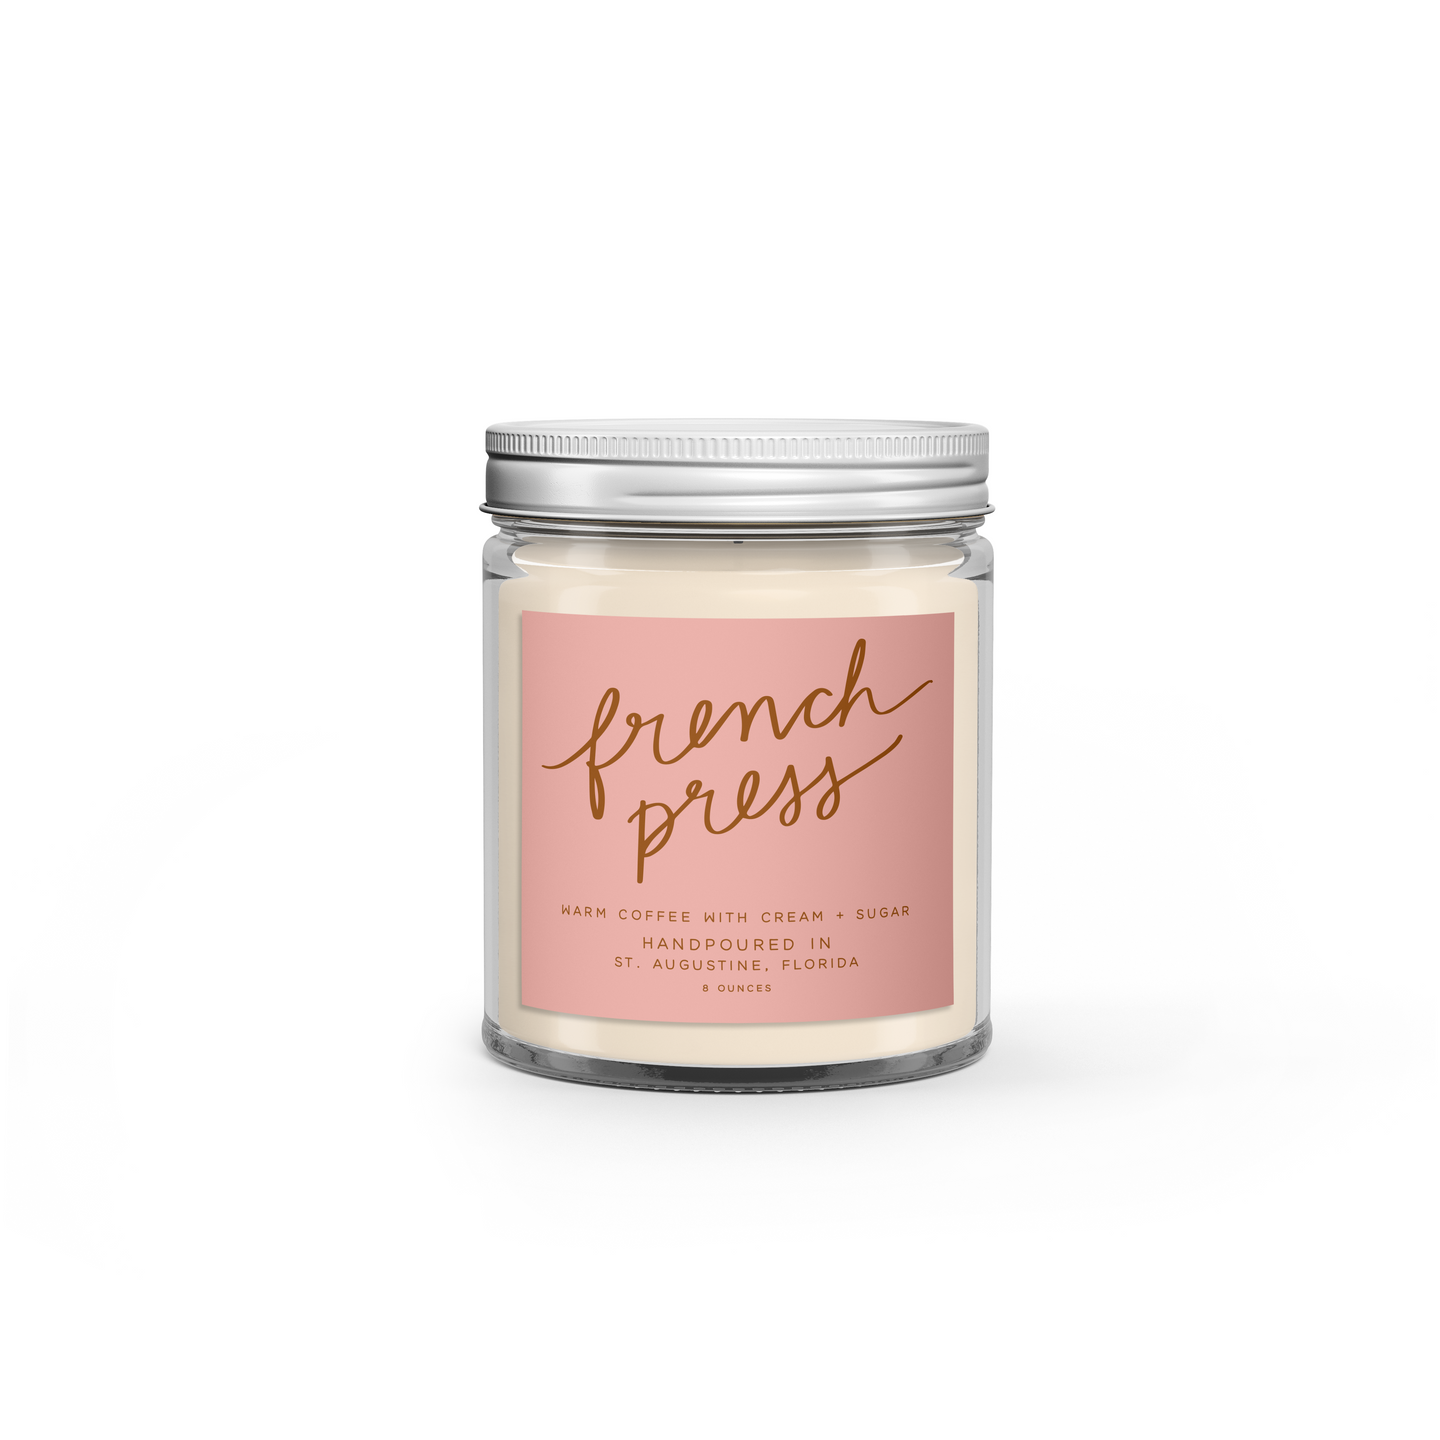 French Press: 8 oz Soy Wax Hand-Poured Candle